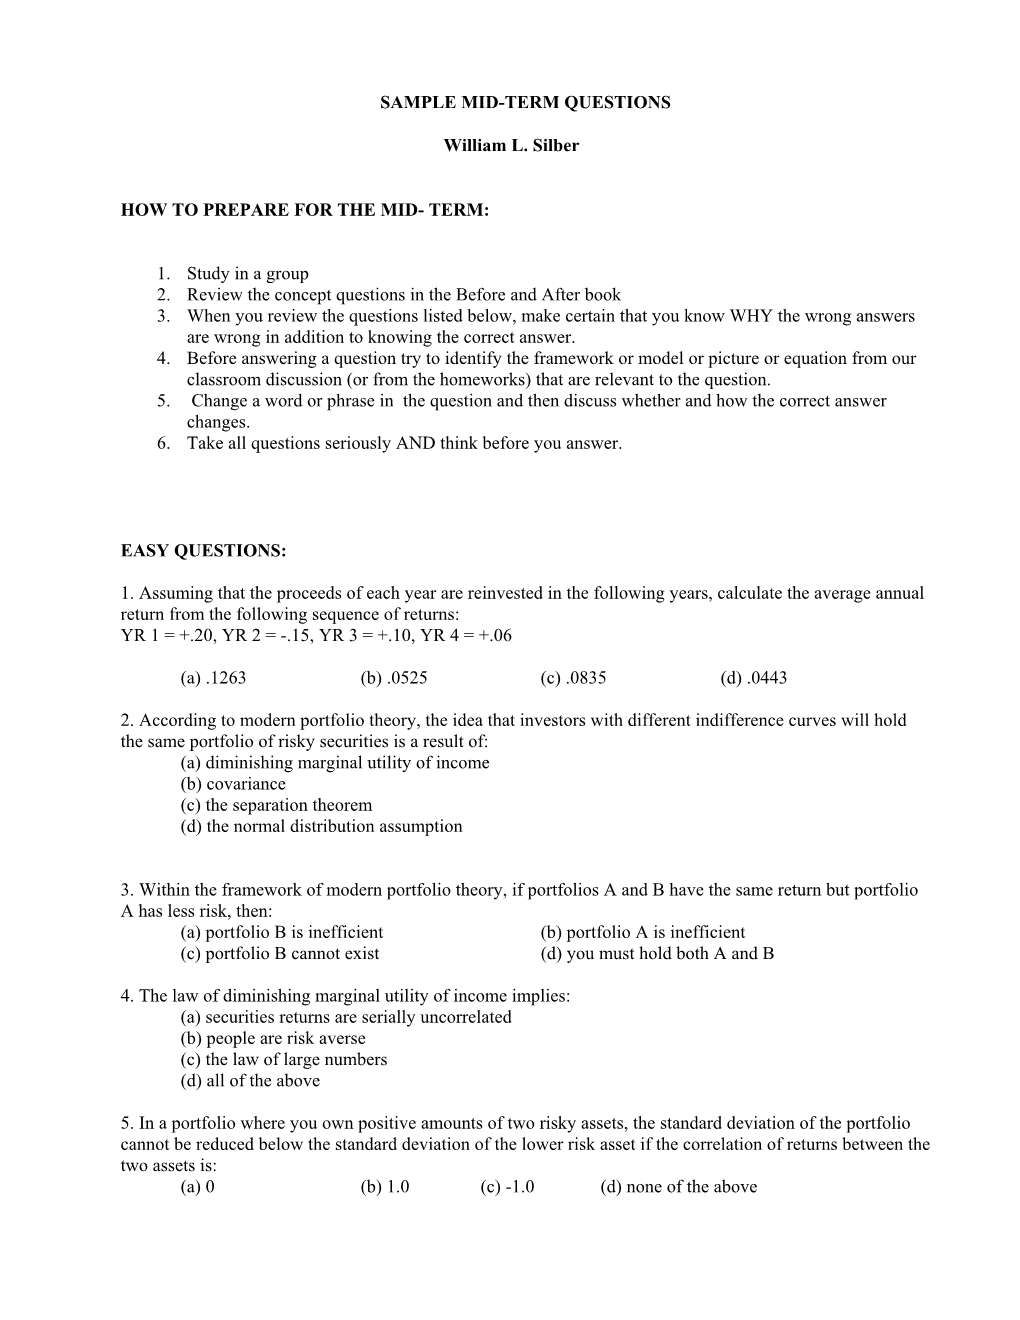 SAMPLE MID-TERM QUESTIONS William L. Silber HOW